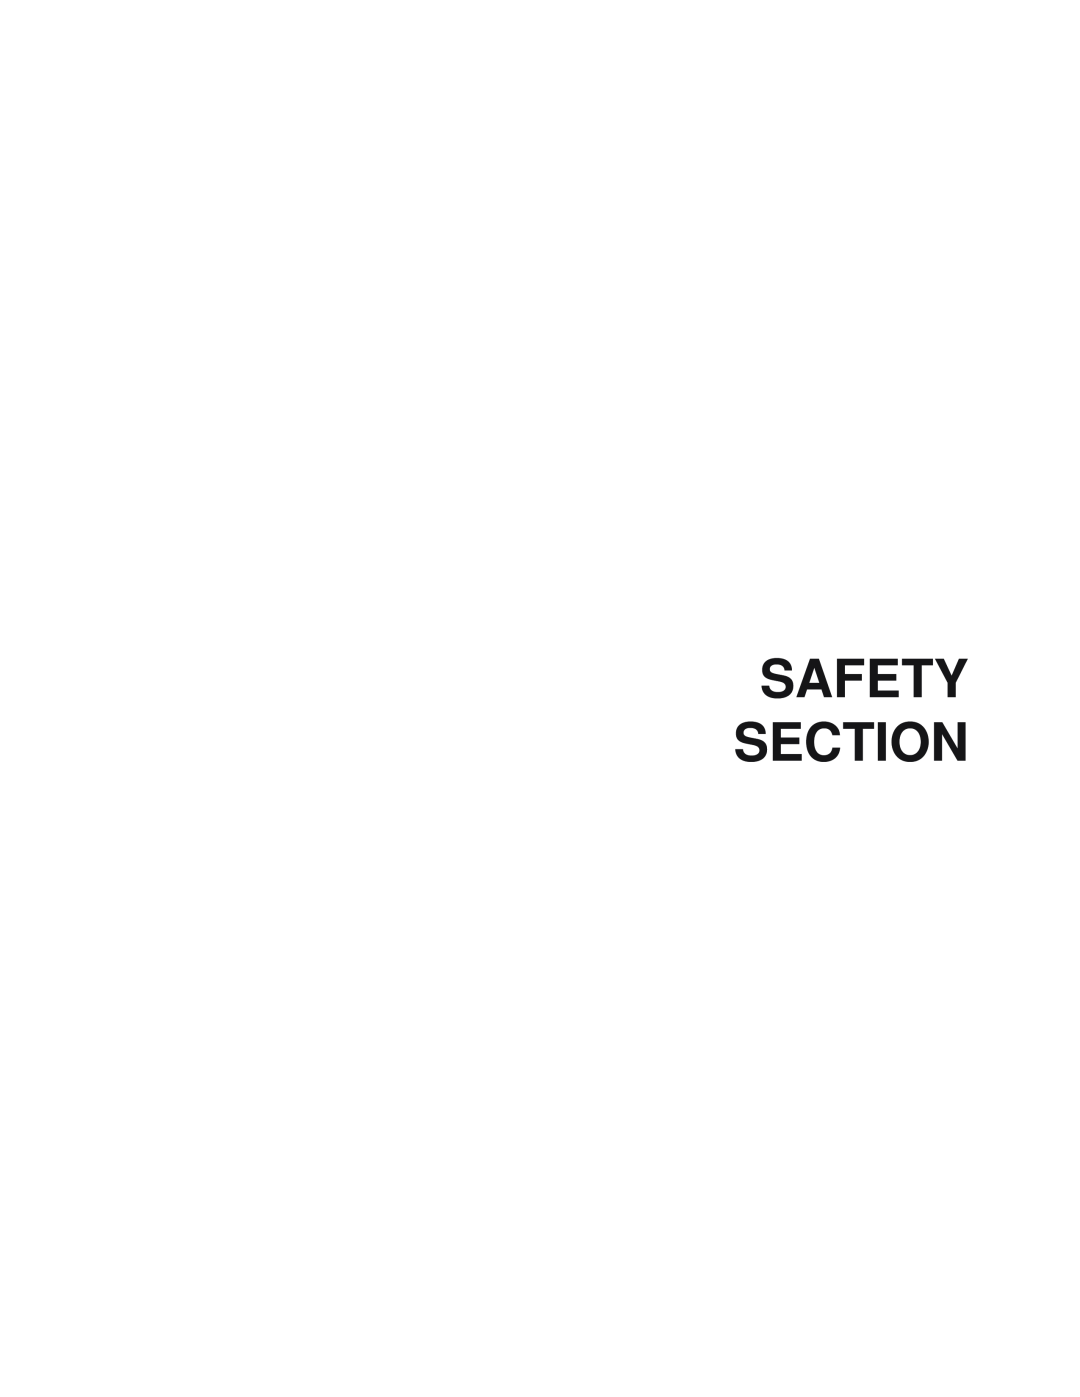 Tiger Products Co., Ltd TWR-120, TWR-180 manual Safety Section 